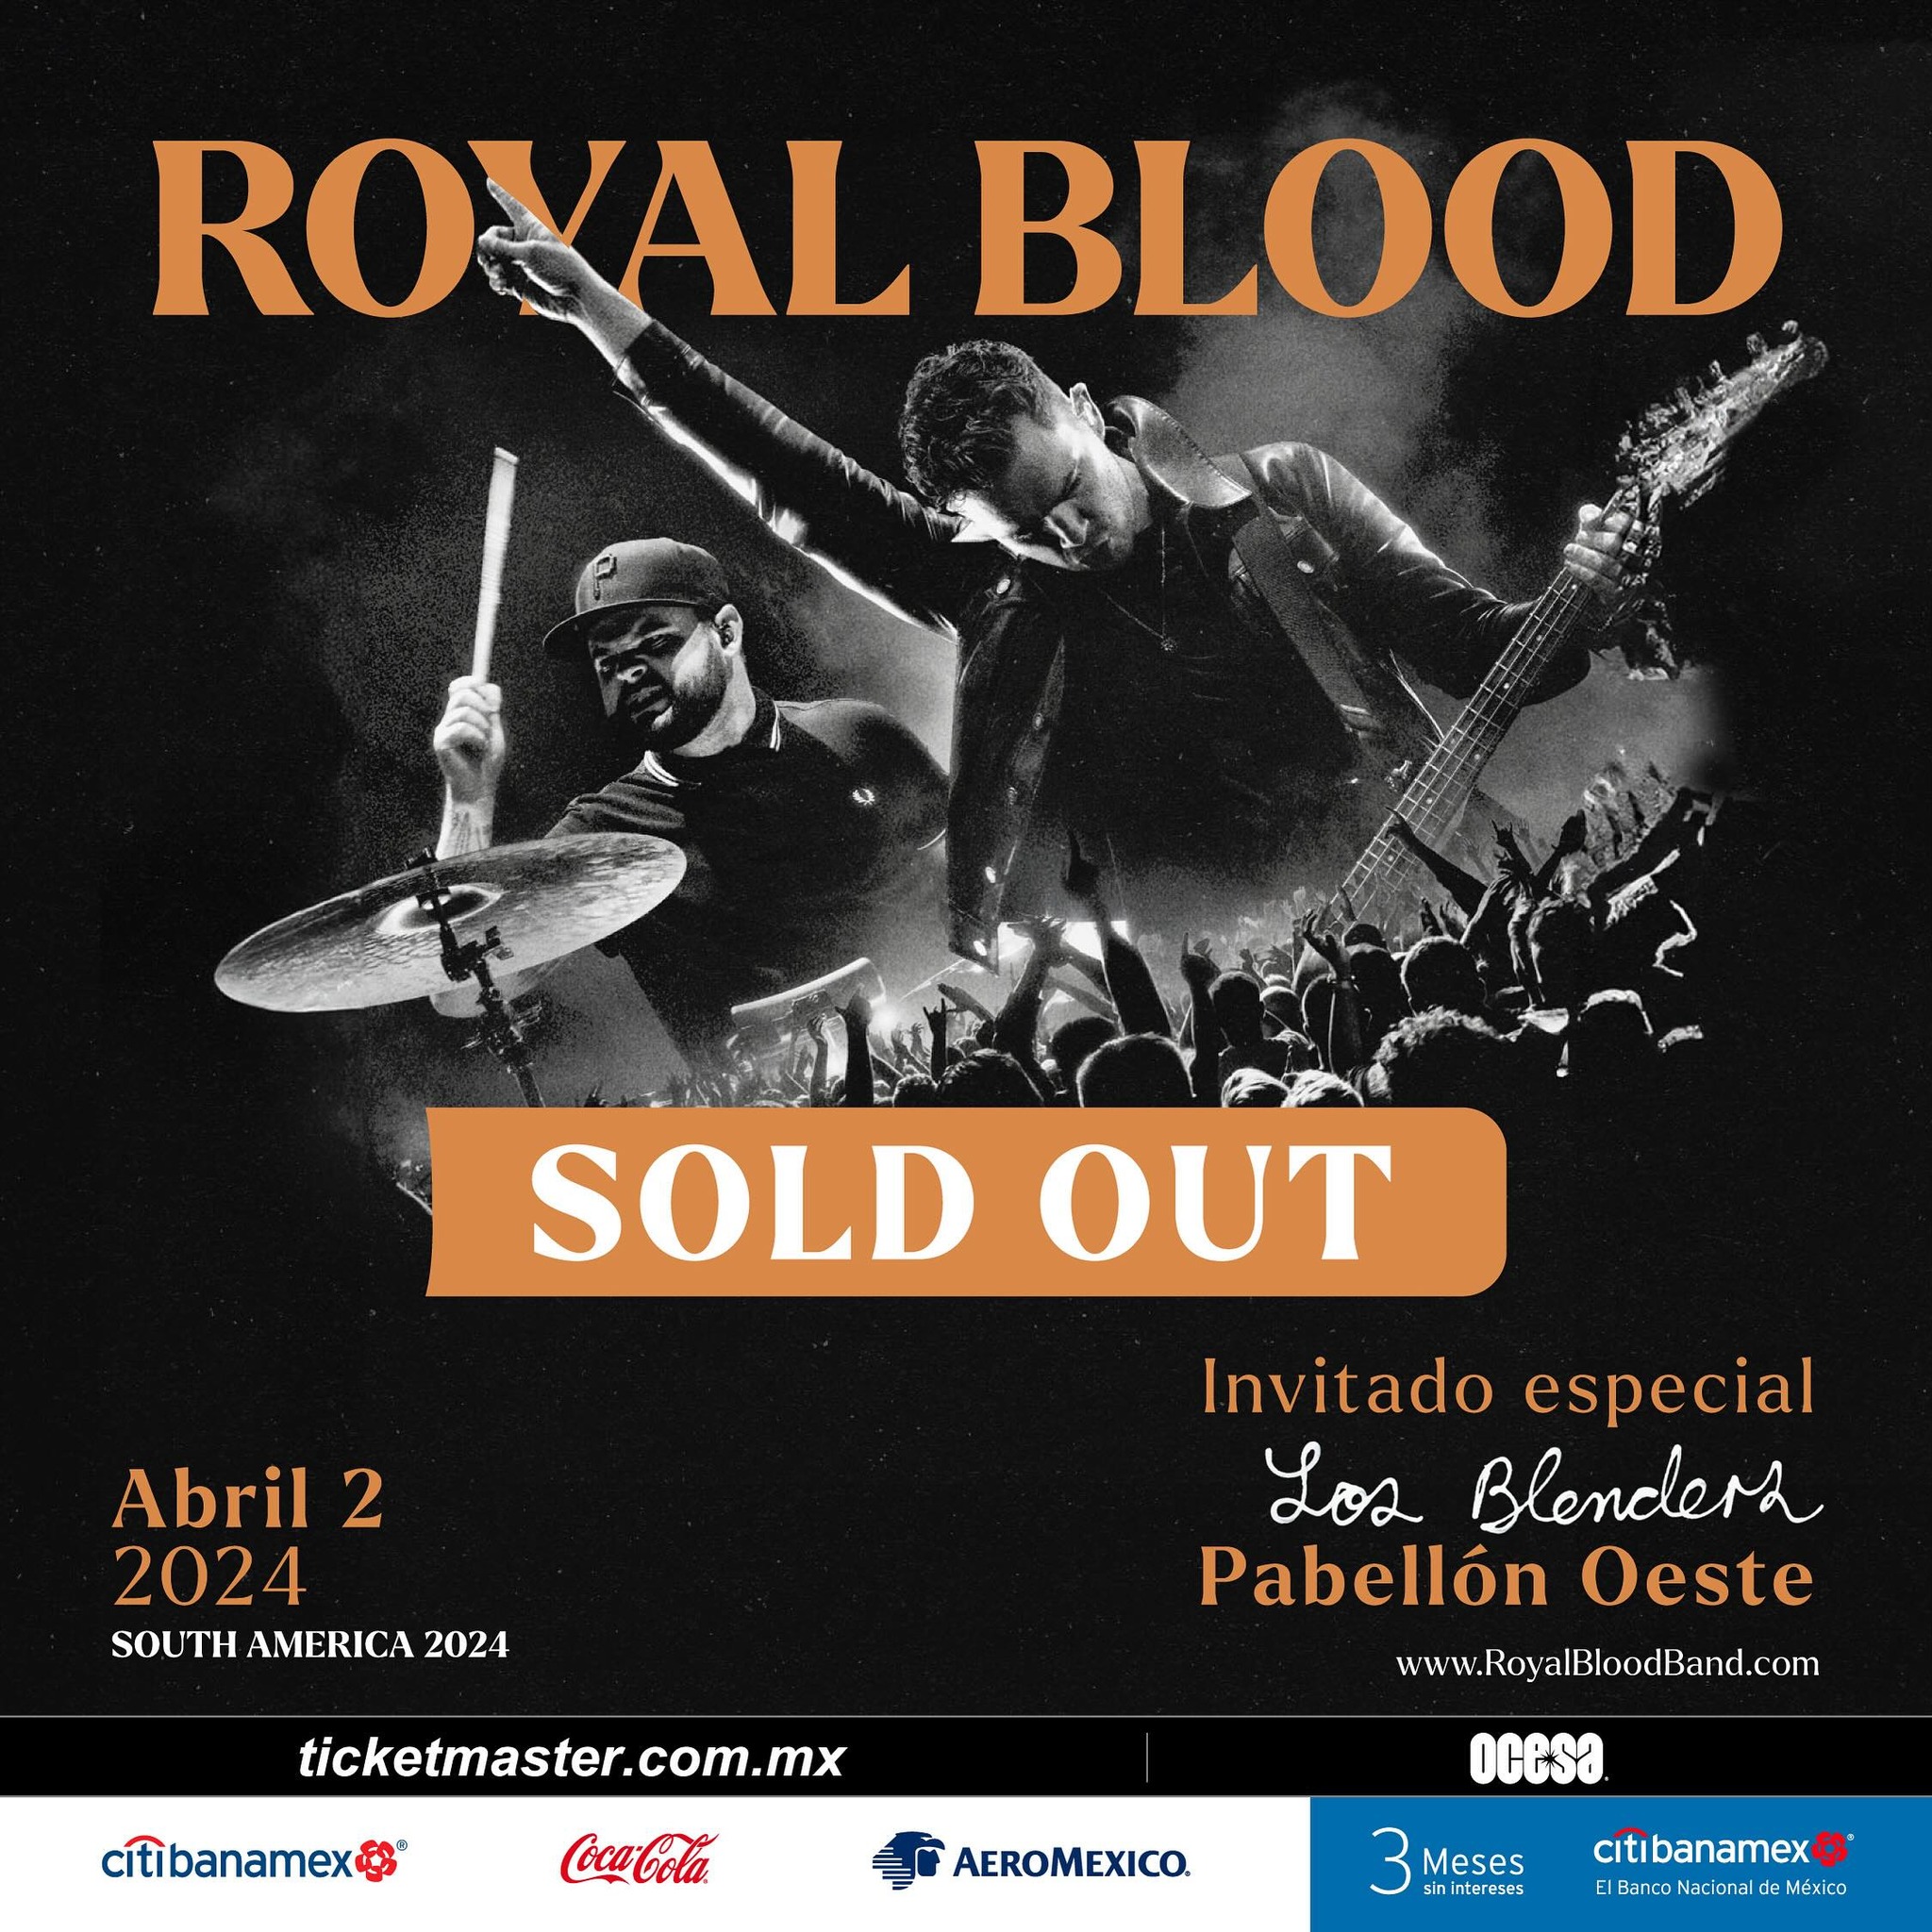 Royal Blood Sold Out